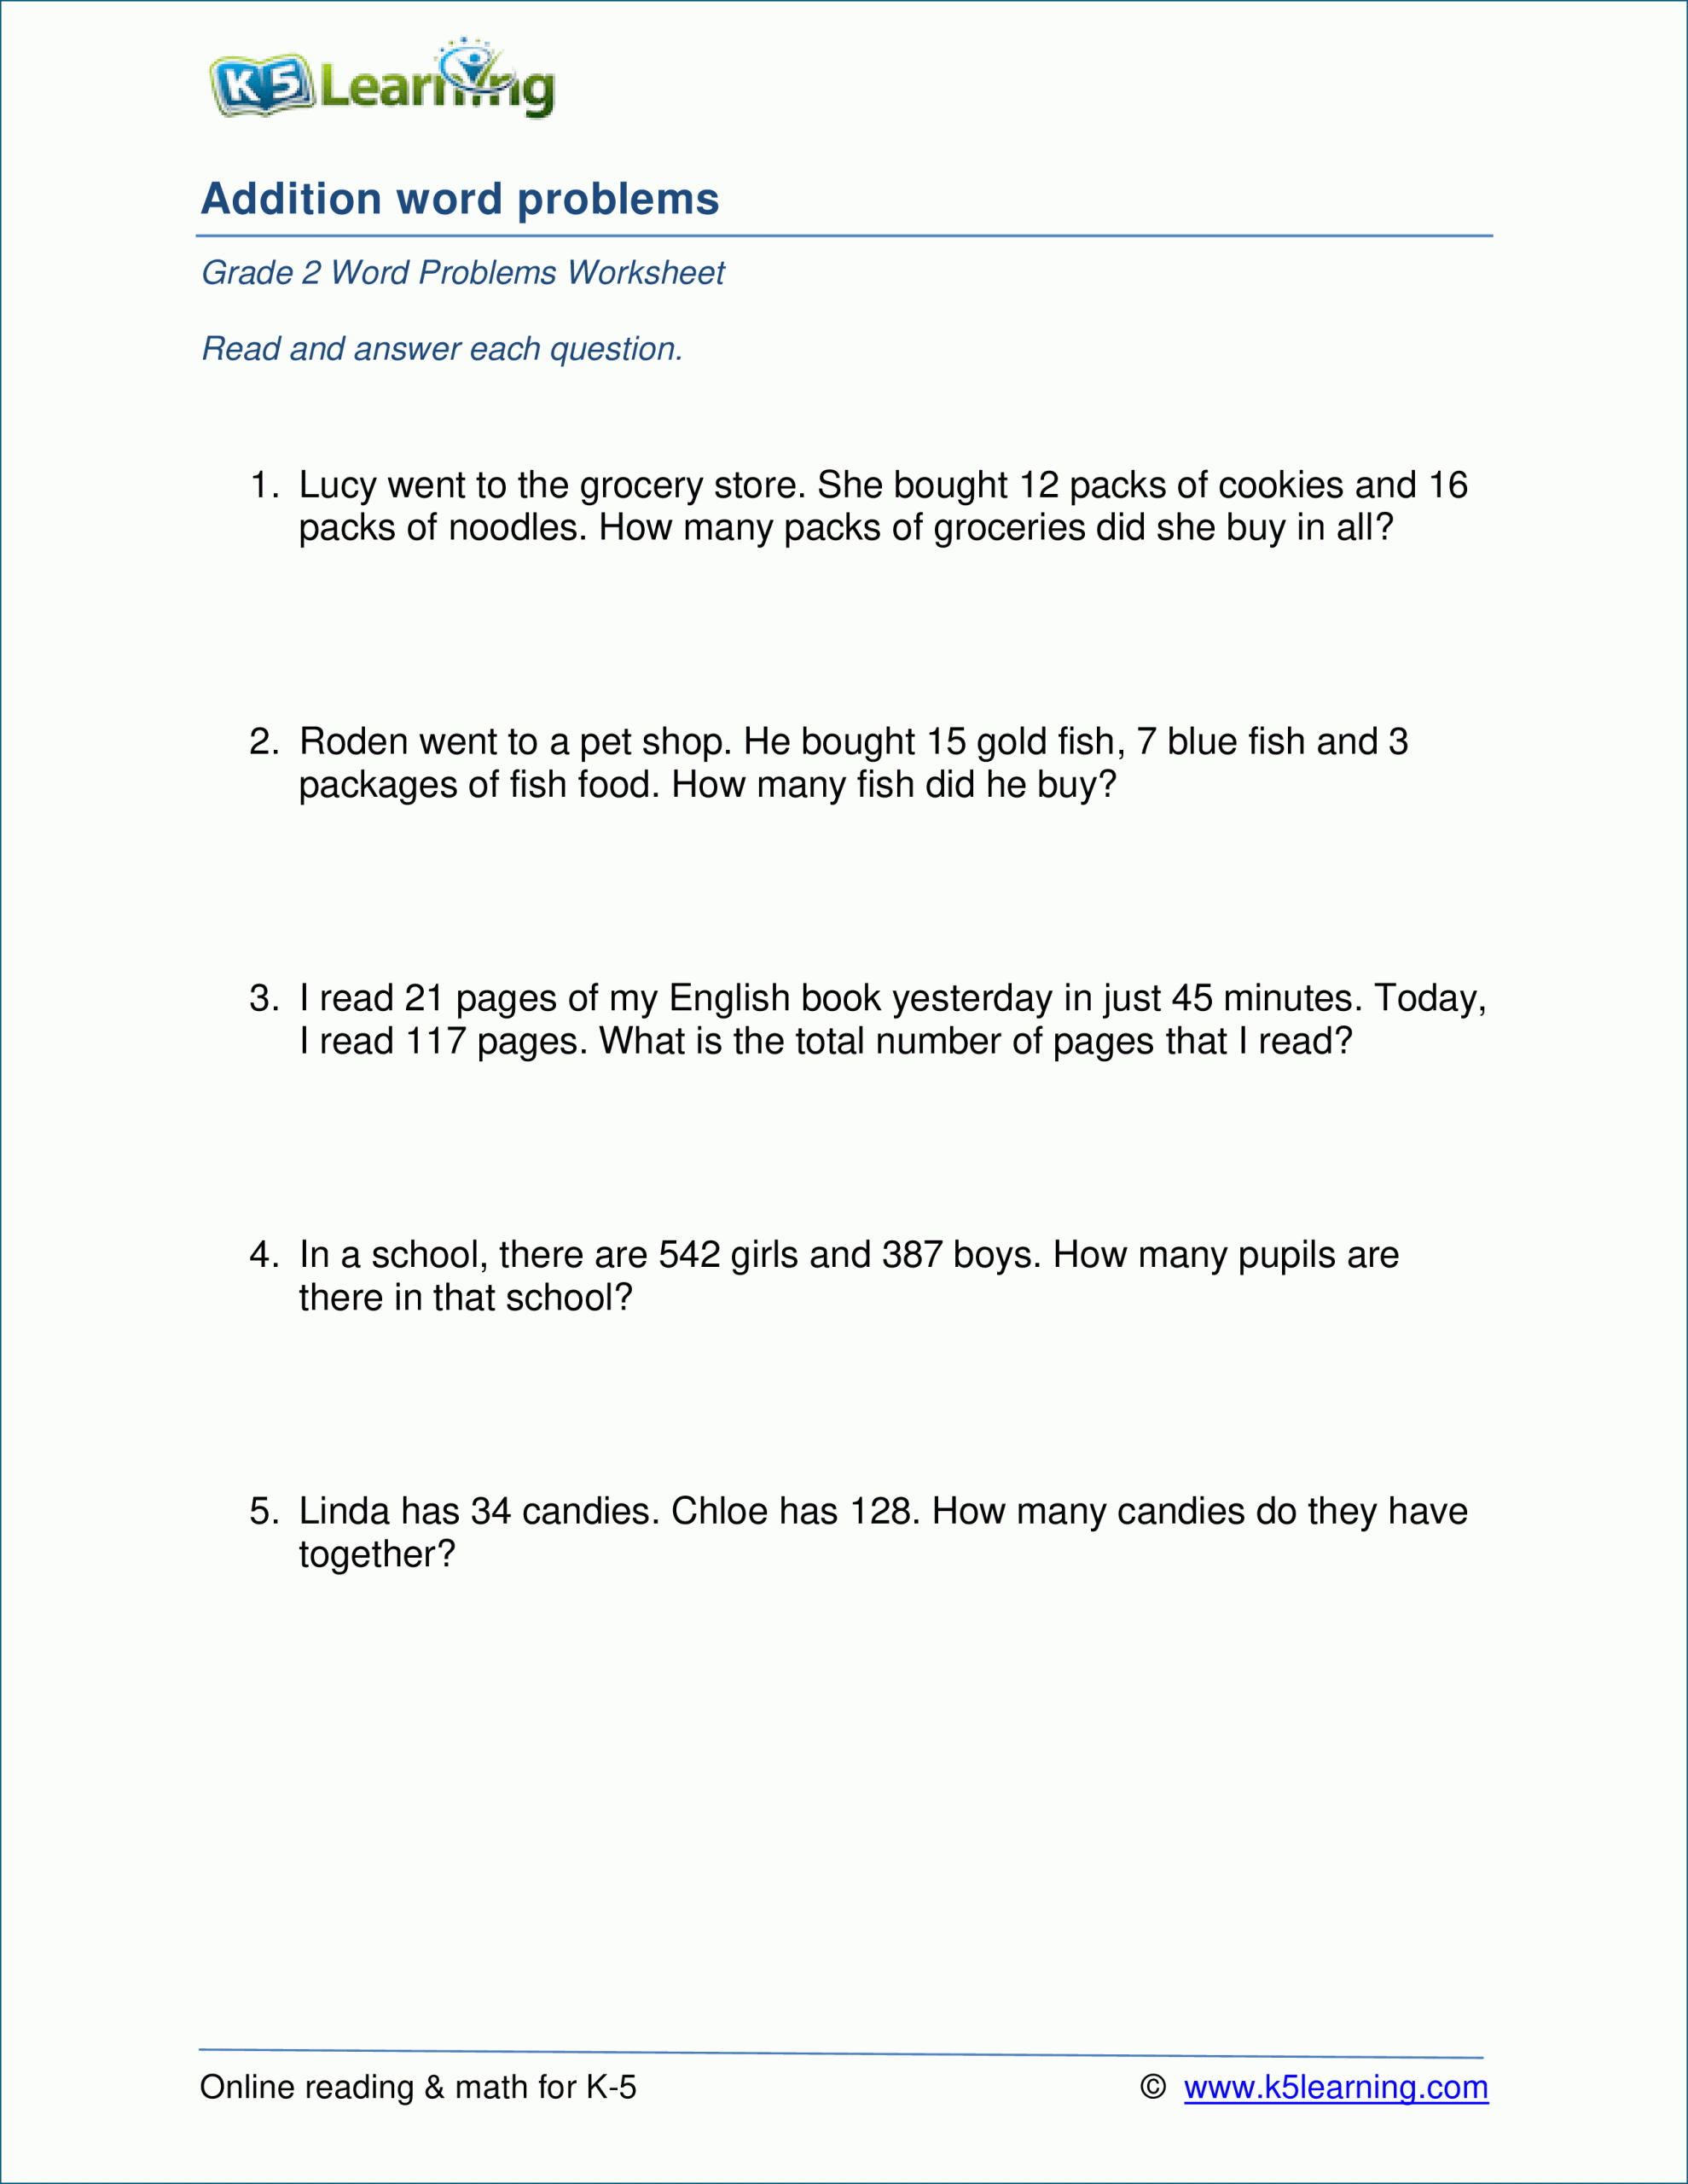 3rd Grade Addition Word Problems For Grade 2 Worksheets